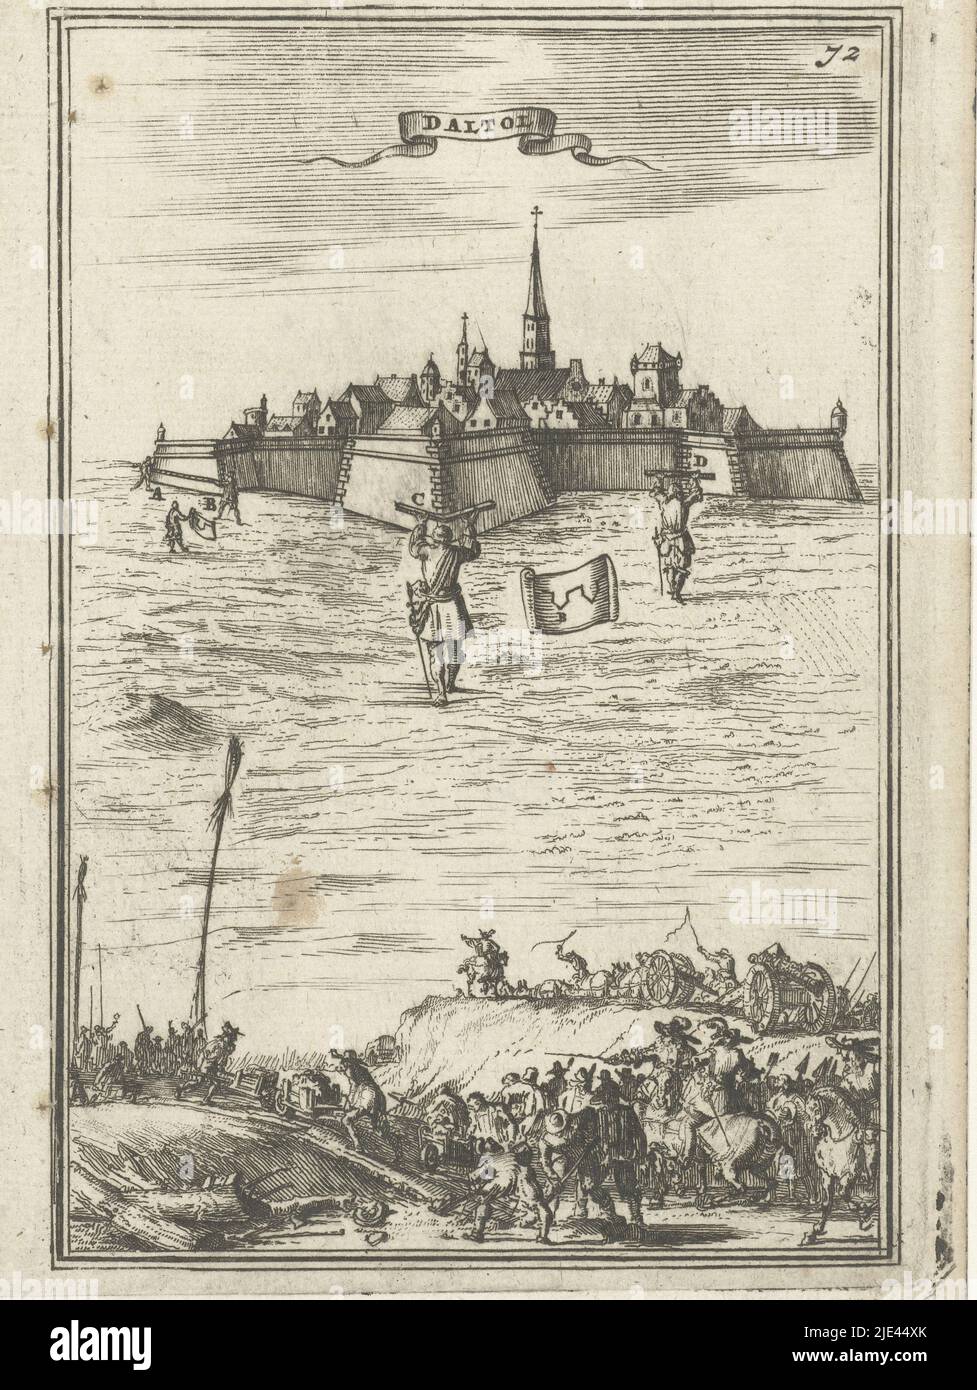 Illustration for 'Den Arbeid van Mars' by Allain Manesson Mallet, Romeyn de Hooghe, 1672, View of a city ('Daltol'); near the walls four men are taking measurements. Below, an army on its way or making quarters. In the top right-hand corner the number 72 (= the number of the page in the book against which the illustration is placed)., print maker: Romeyn de Hooghe, Romeyn de Hooghe, Amsterdam, 1672, paper, etching, engraving, h 185 mm × w 110 mm Stock Photo